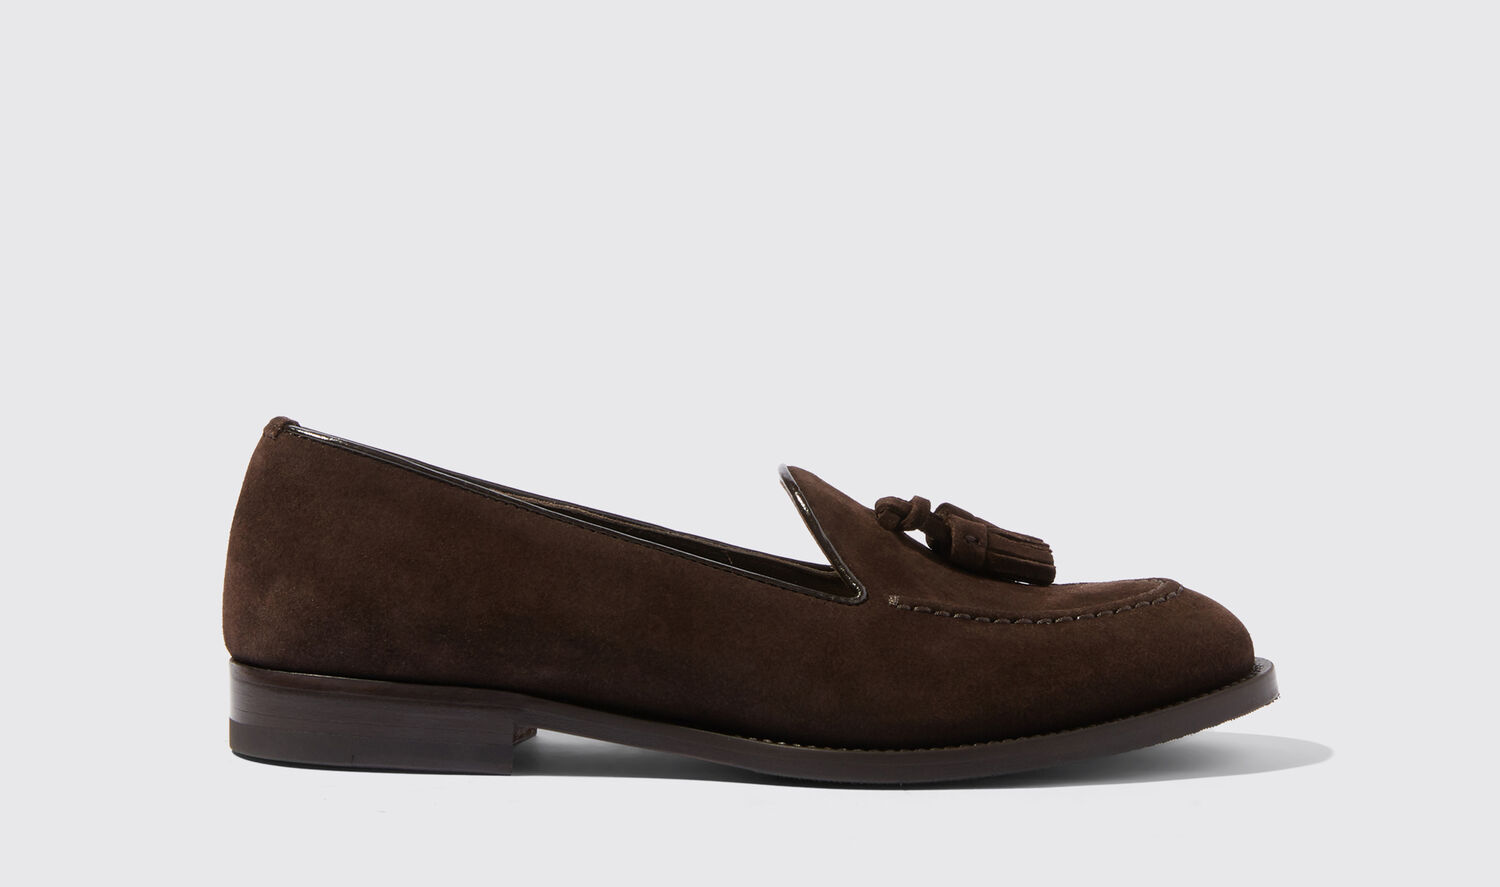 Scarosso Sienna Tasselled Leather Loafers In Brown Suede